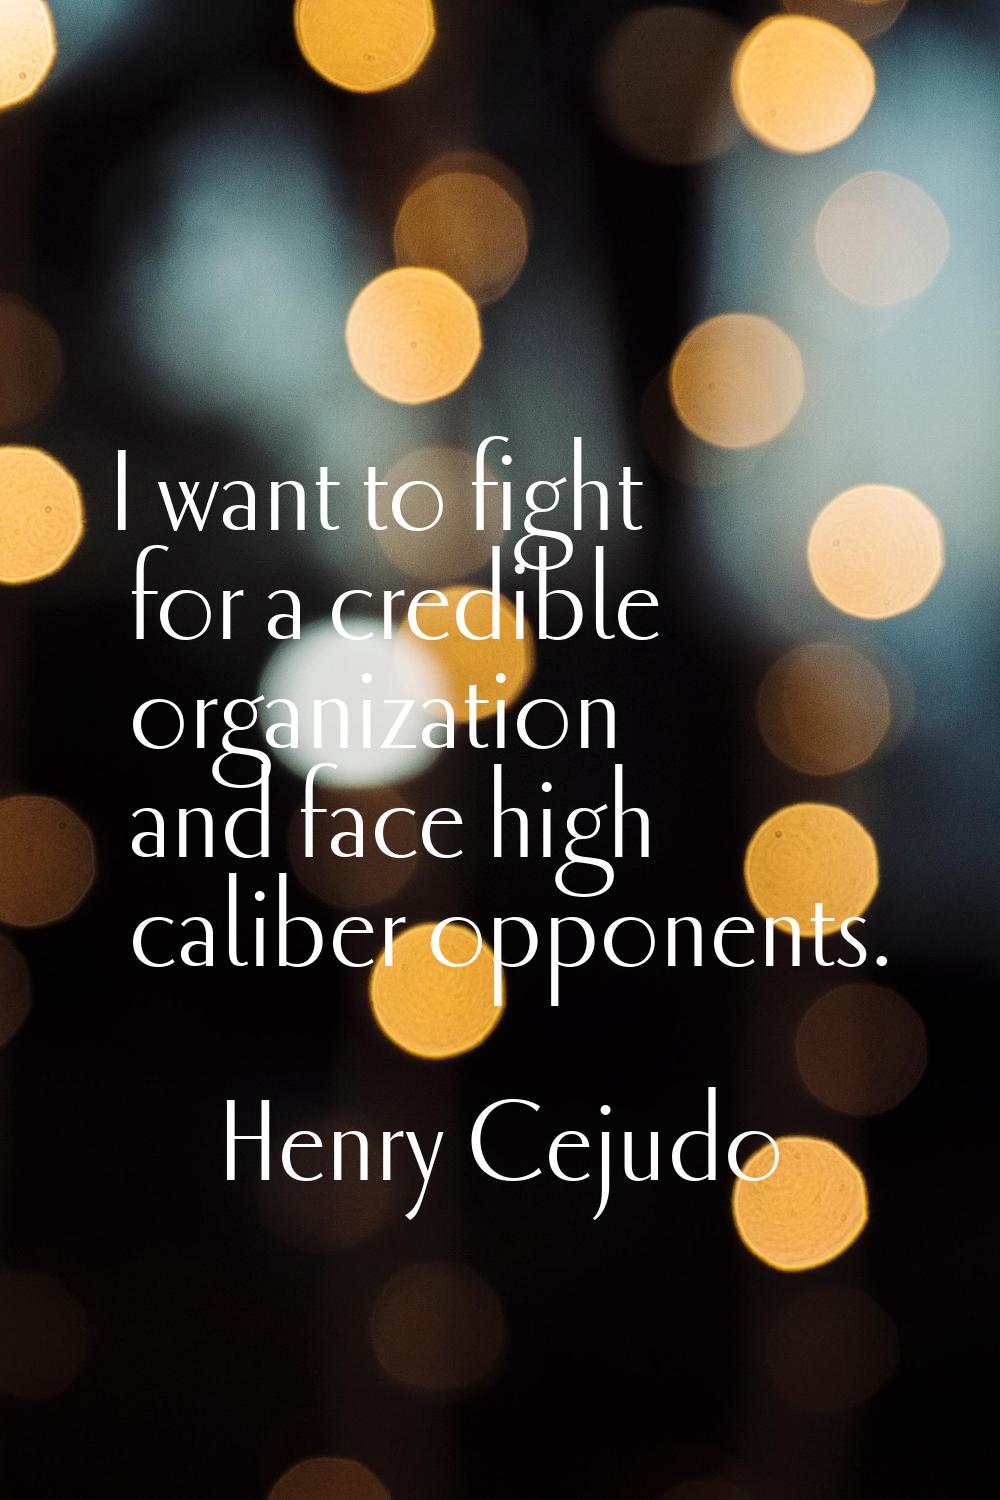 I want to fight for a credible organization and face high caliber opponents.